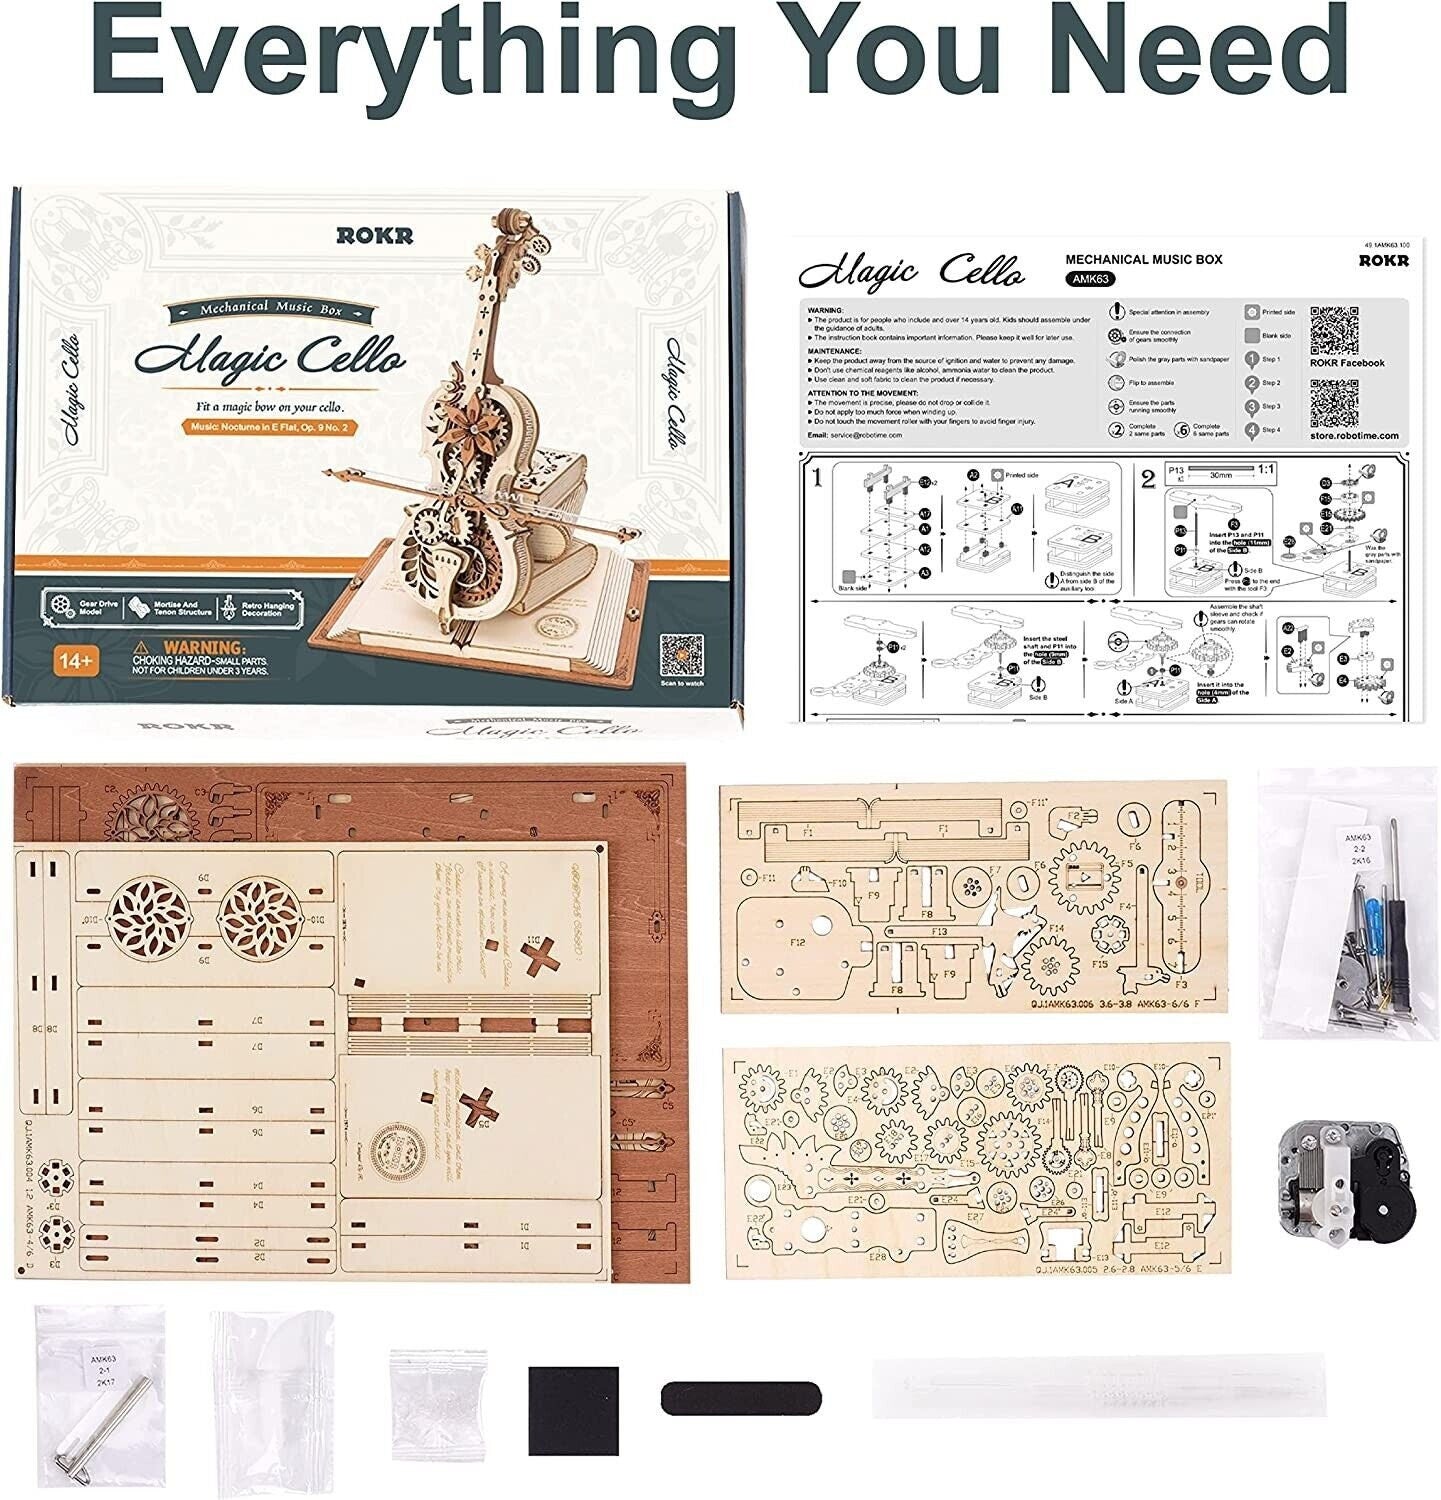 Build Your Own Cello, Musical Instrument DIY Kit, Model Set, Model Craft Kit for Adults and Kids, Cello craft Kit, Unique Gift Ideas